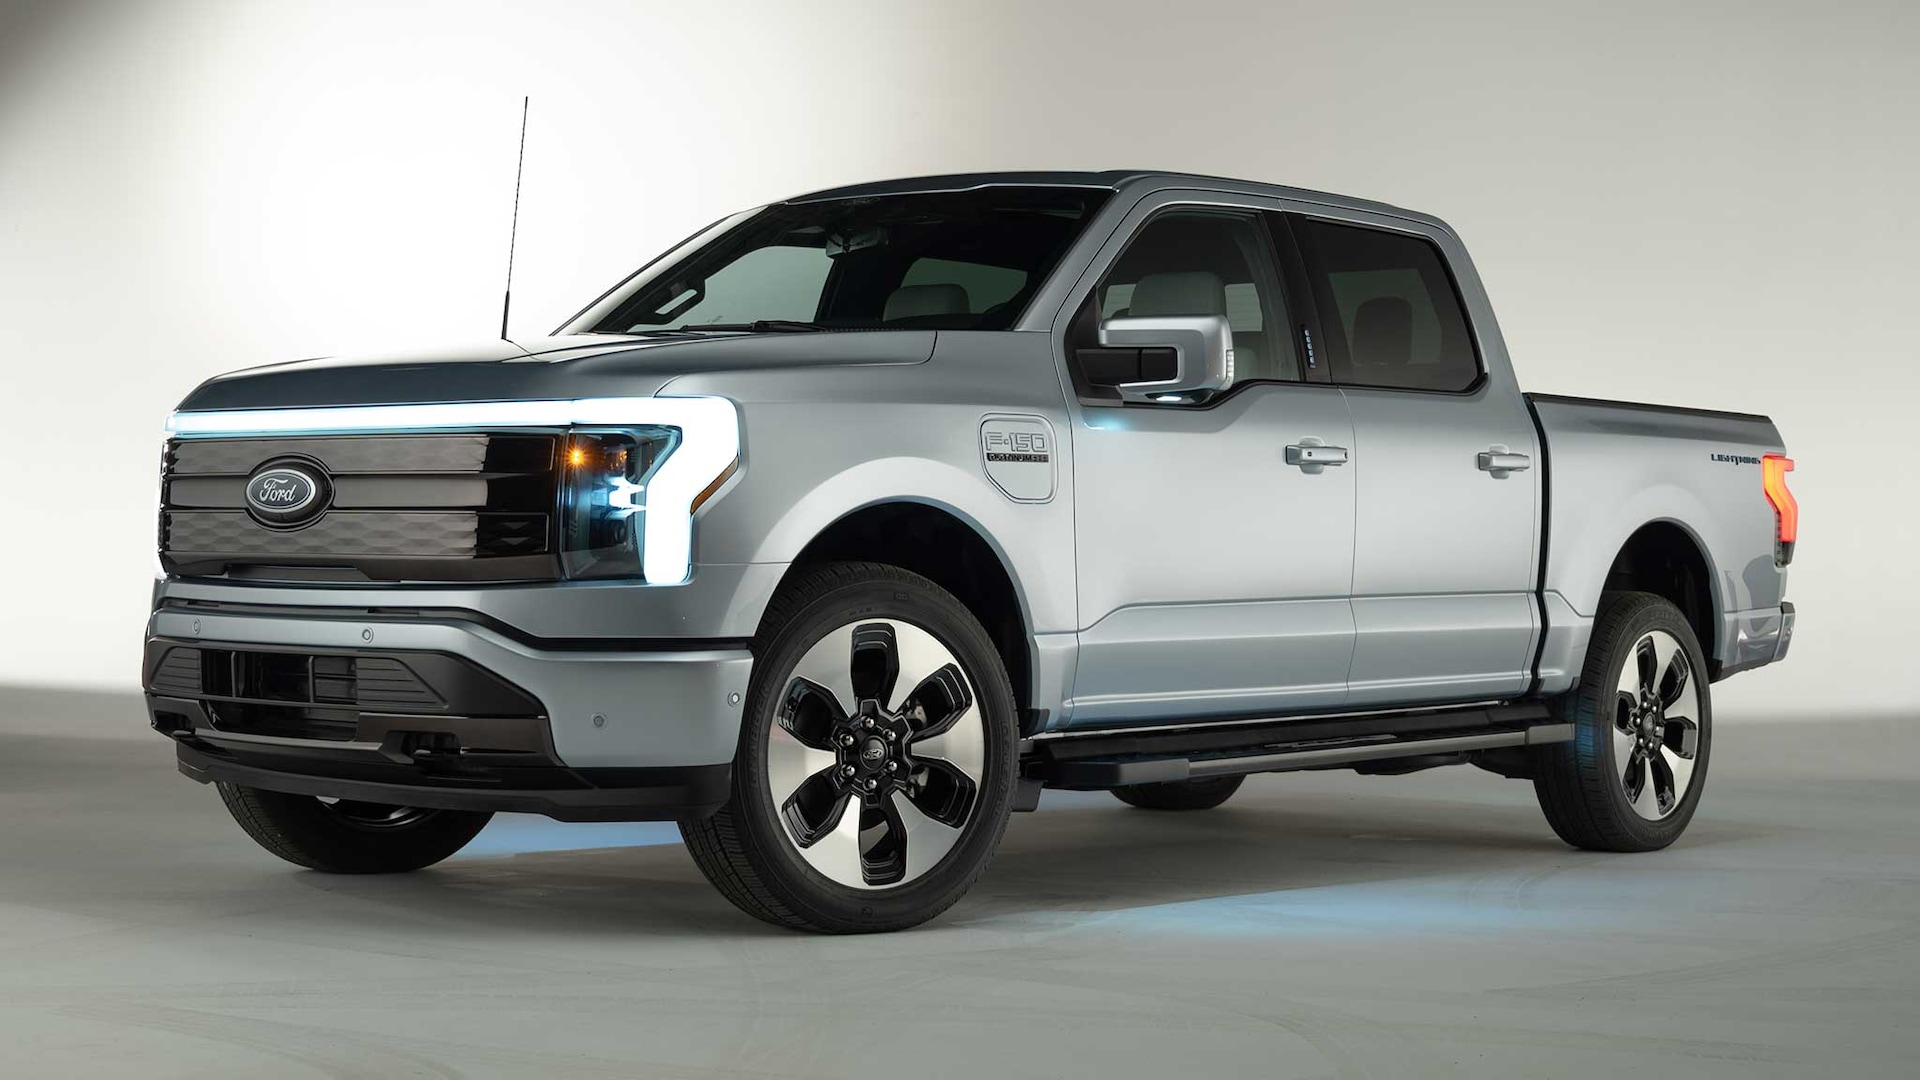 The Ford F-150 Lightning Electric Truck Has More Power Than We Thought!